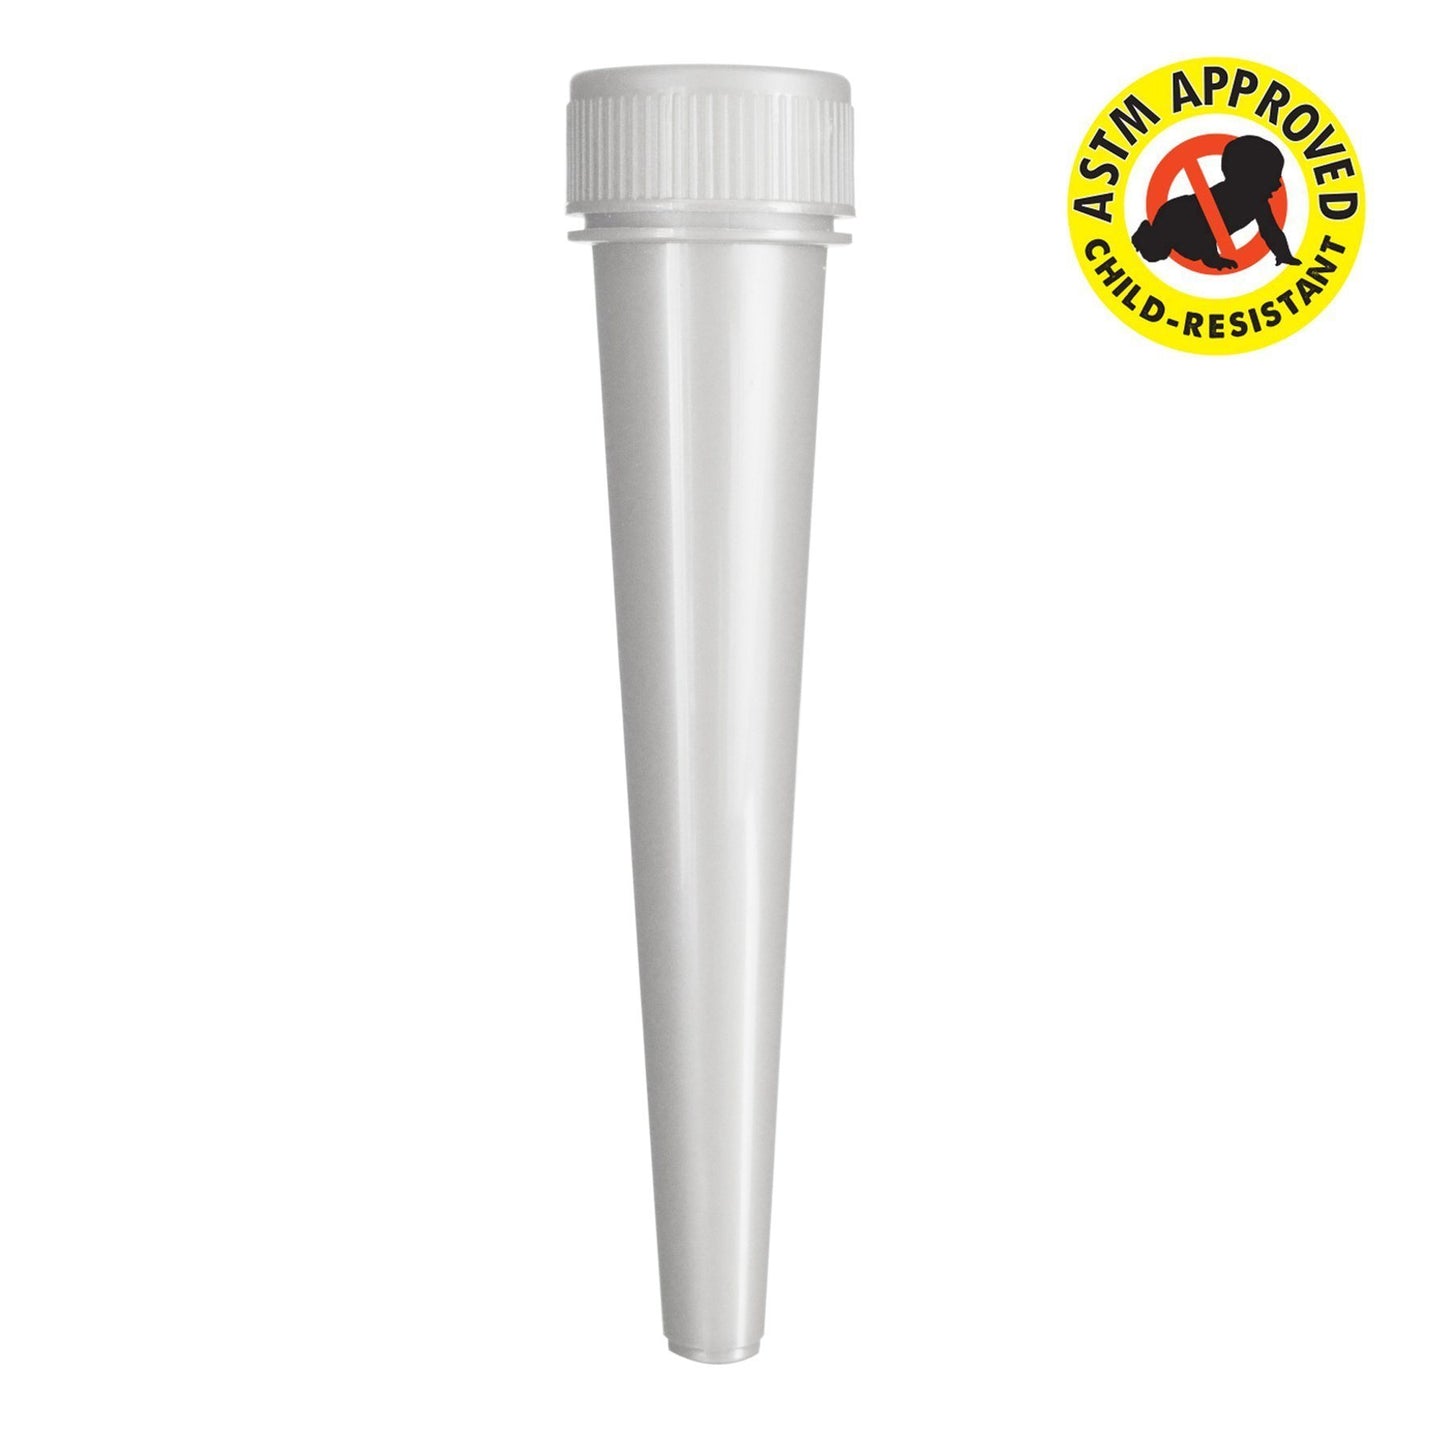 98mm Conical Tube Black & Gold With Child Resistant Cap (1000 Count) Flower Power Packages 